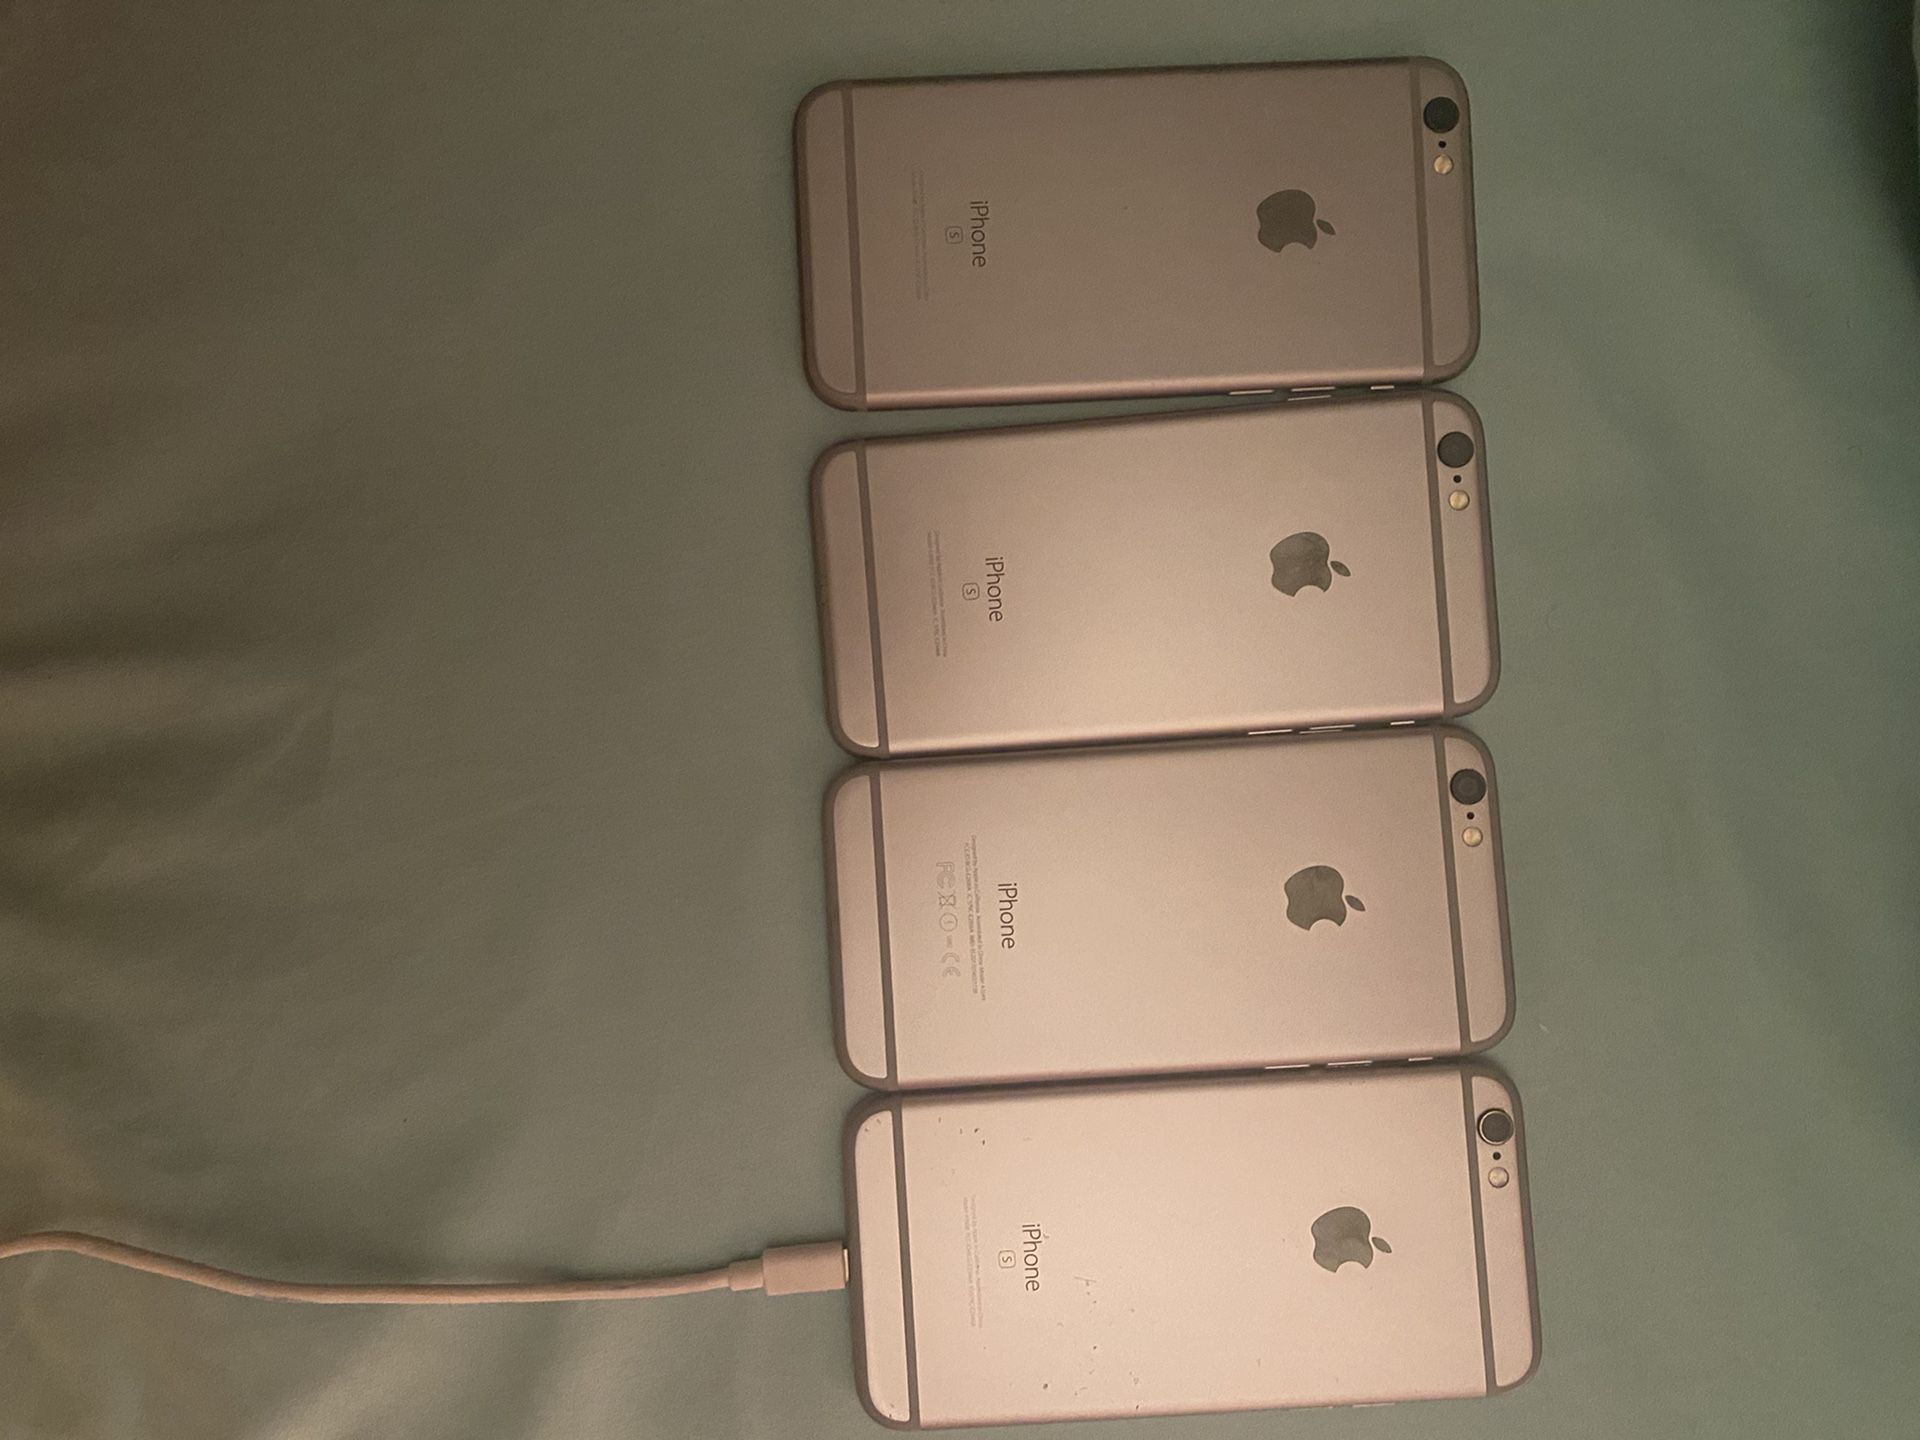 Unlocked iPhone 6&6s (very clean)$120each(2 sold)2left